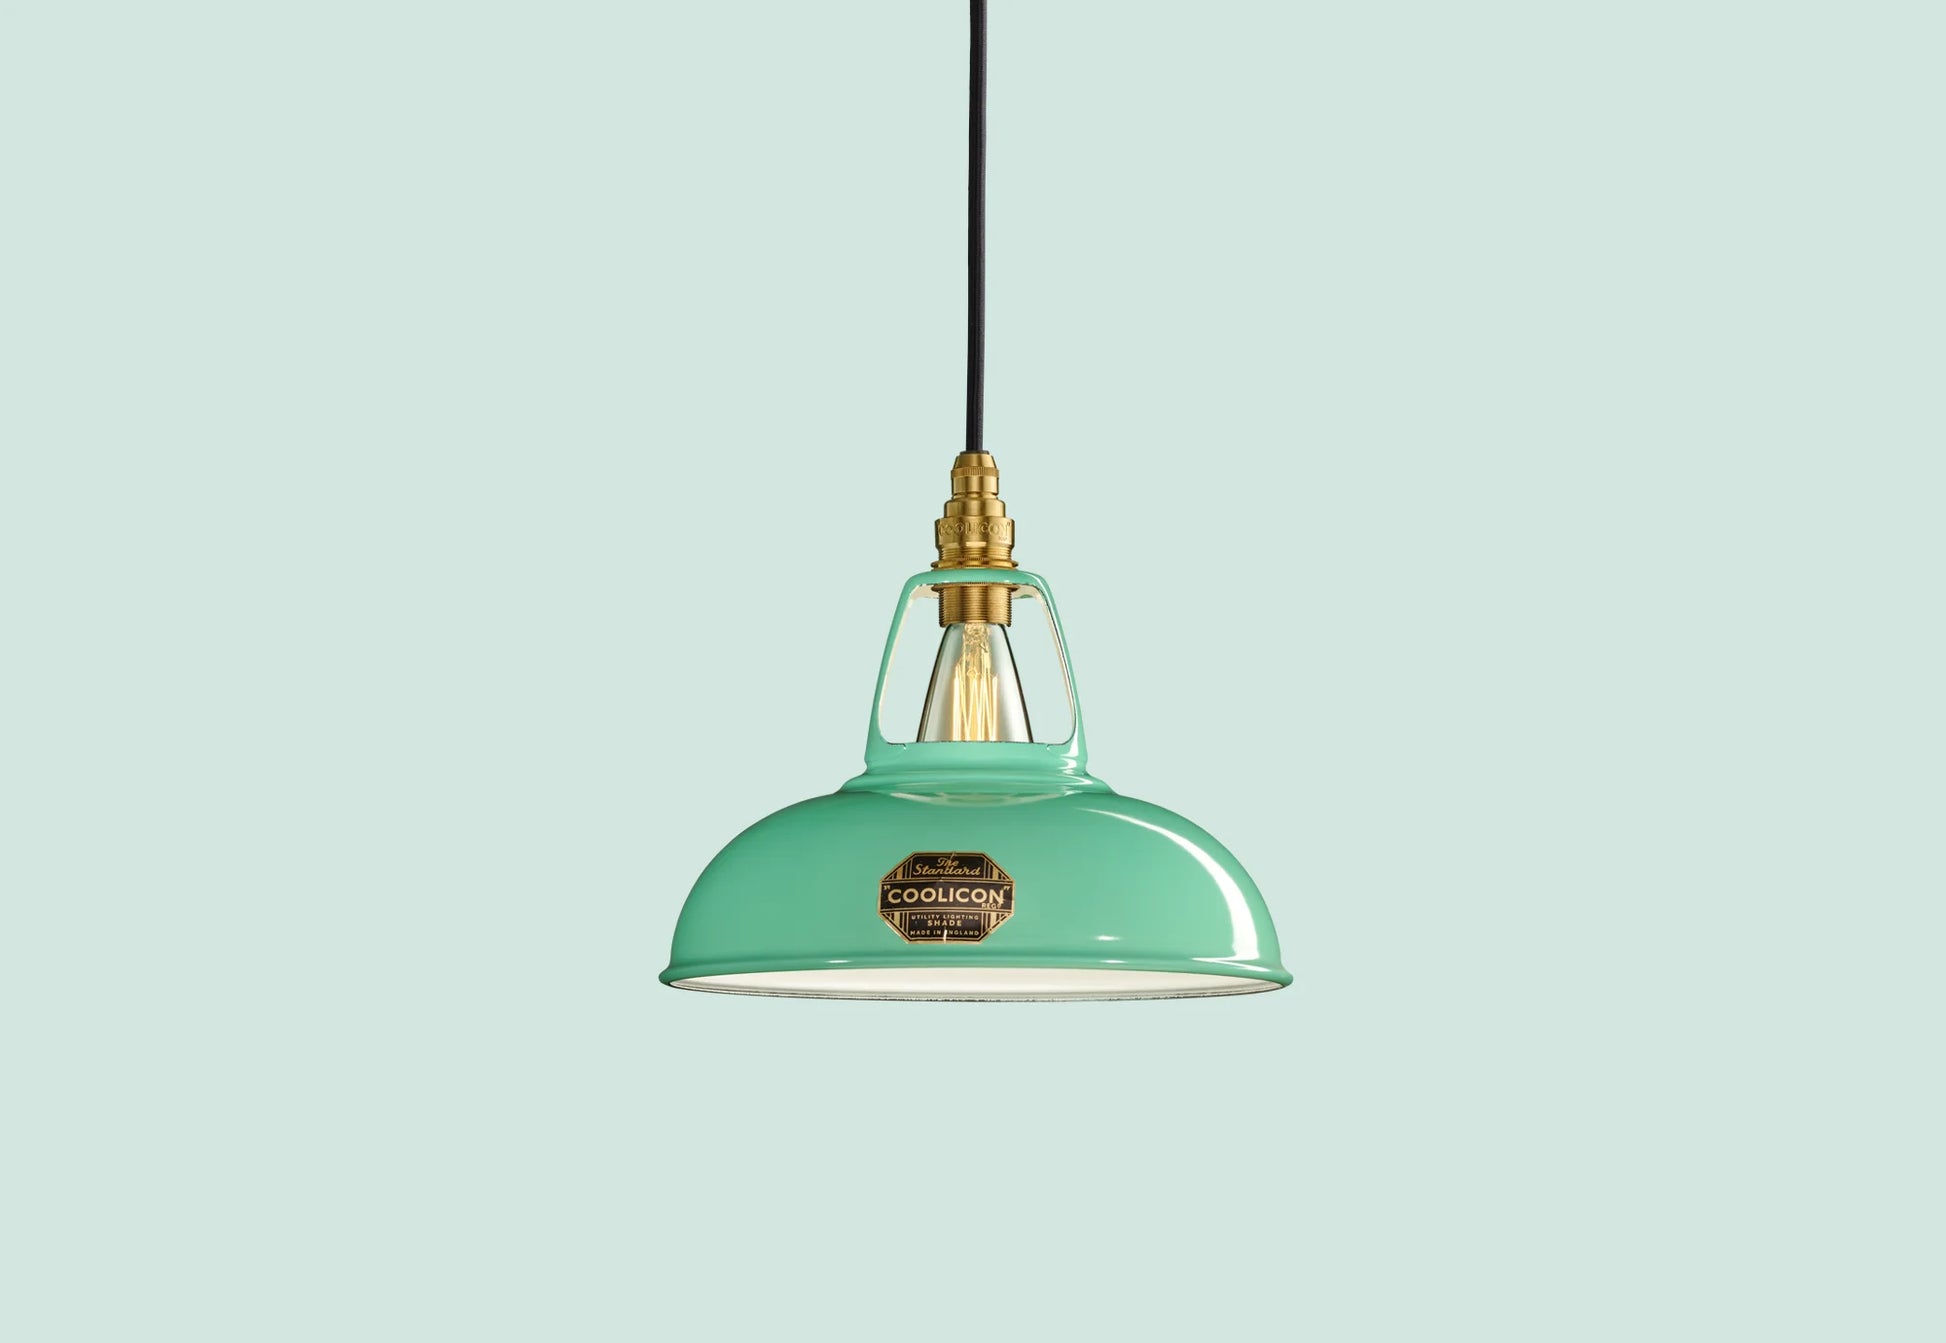 Fresh Teal Coolicon lampshade with a Porcelain pendant set over a light teal background